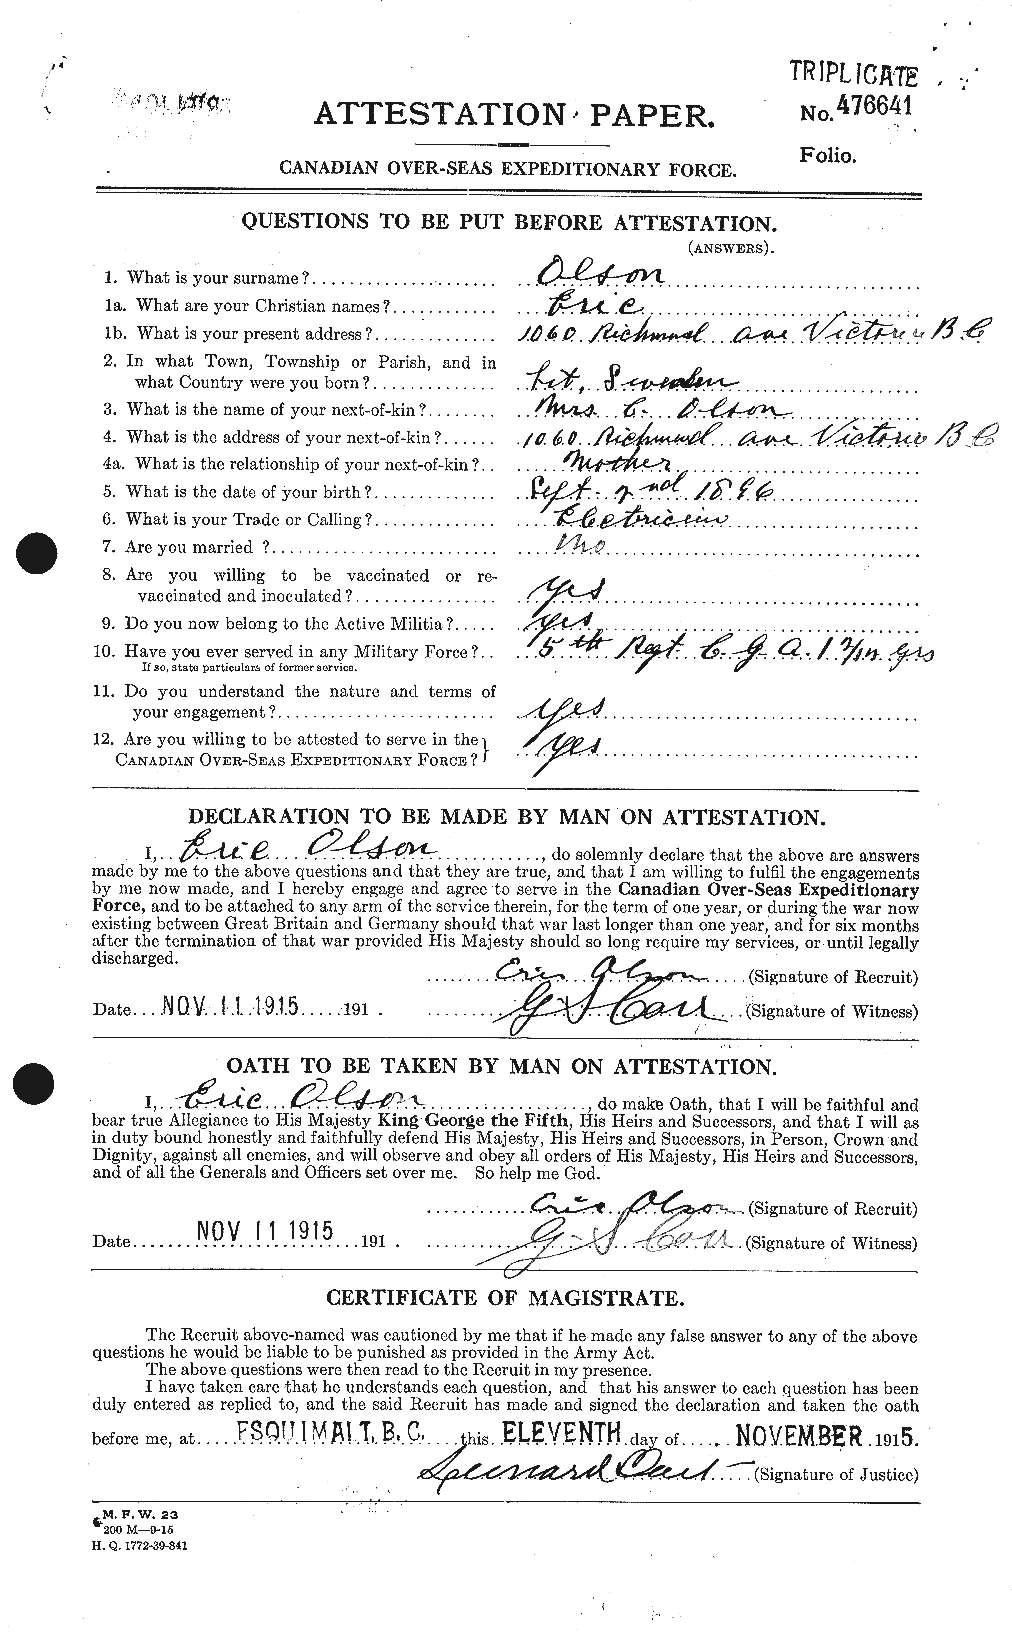 Personnel Records of the First World War - CEF 557197a